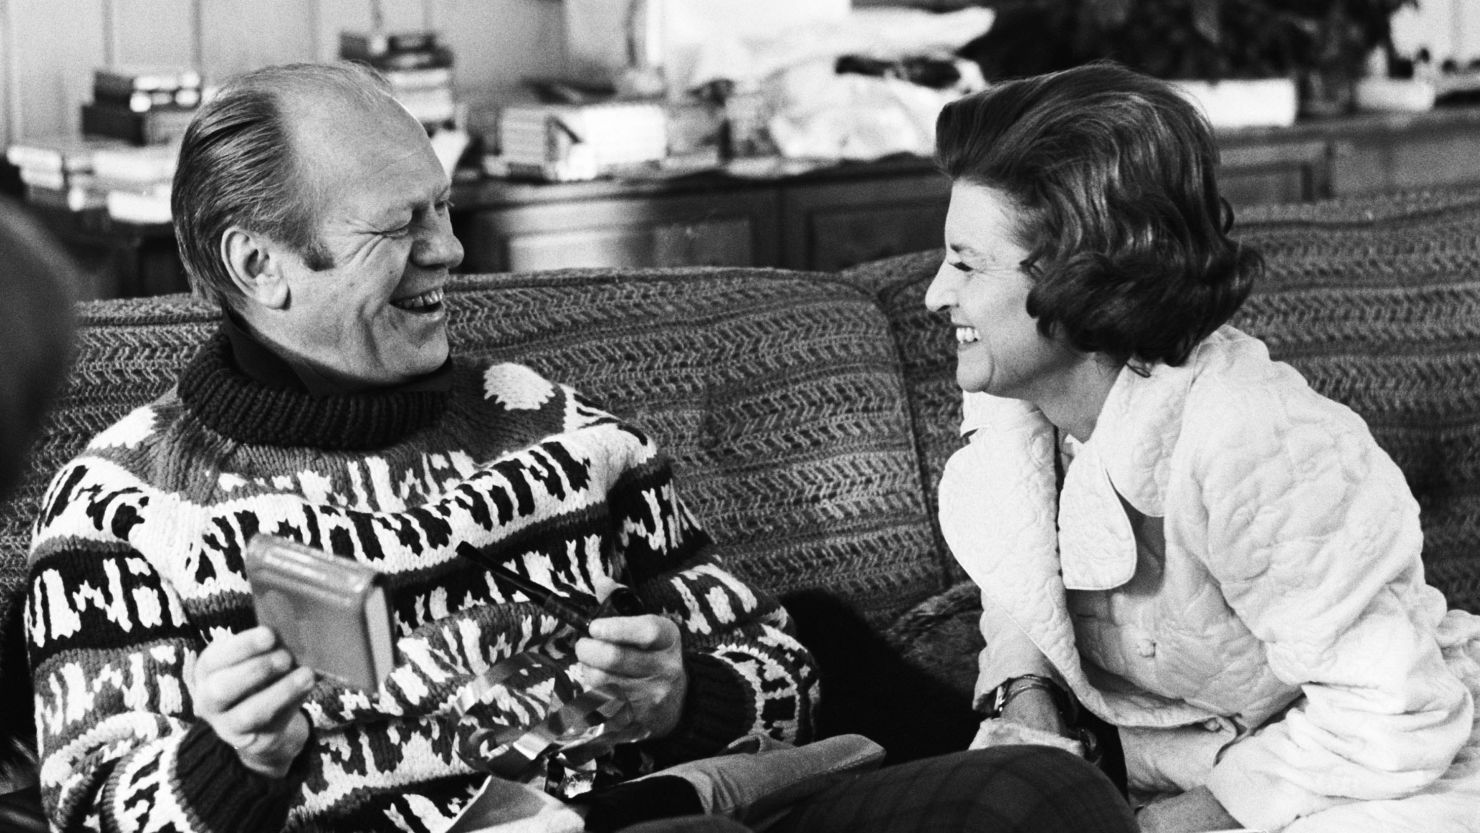 First Lady Betty Ford watches as her husband President Gerald R. Ford open his gift from her during the family's first visit of the presidency to their usual Christmas holiday vacation spot in Vail, Colorado. 